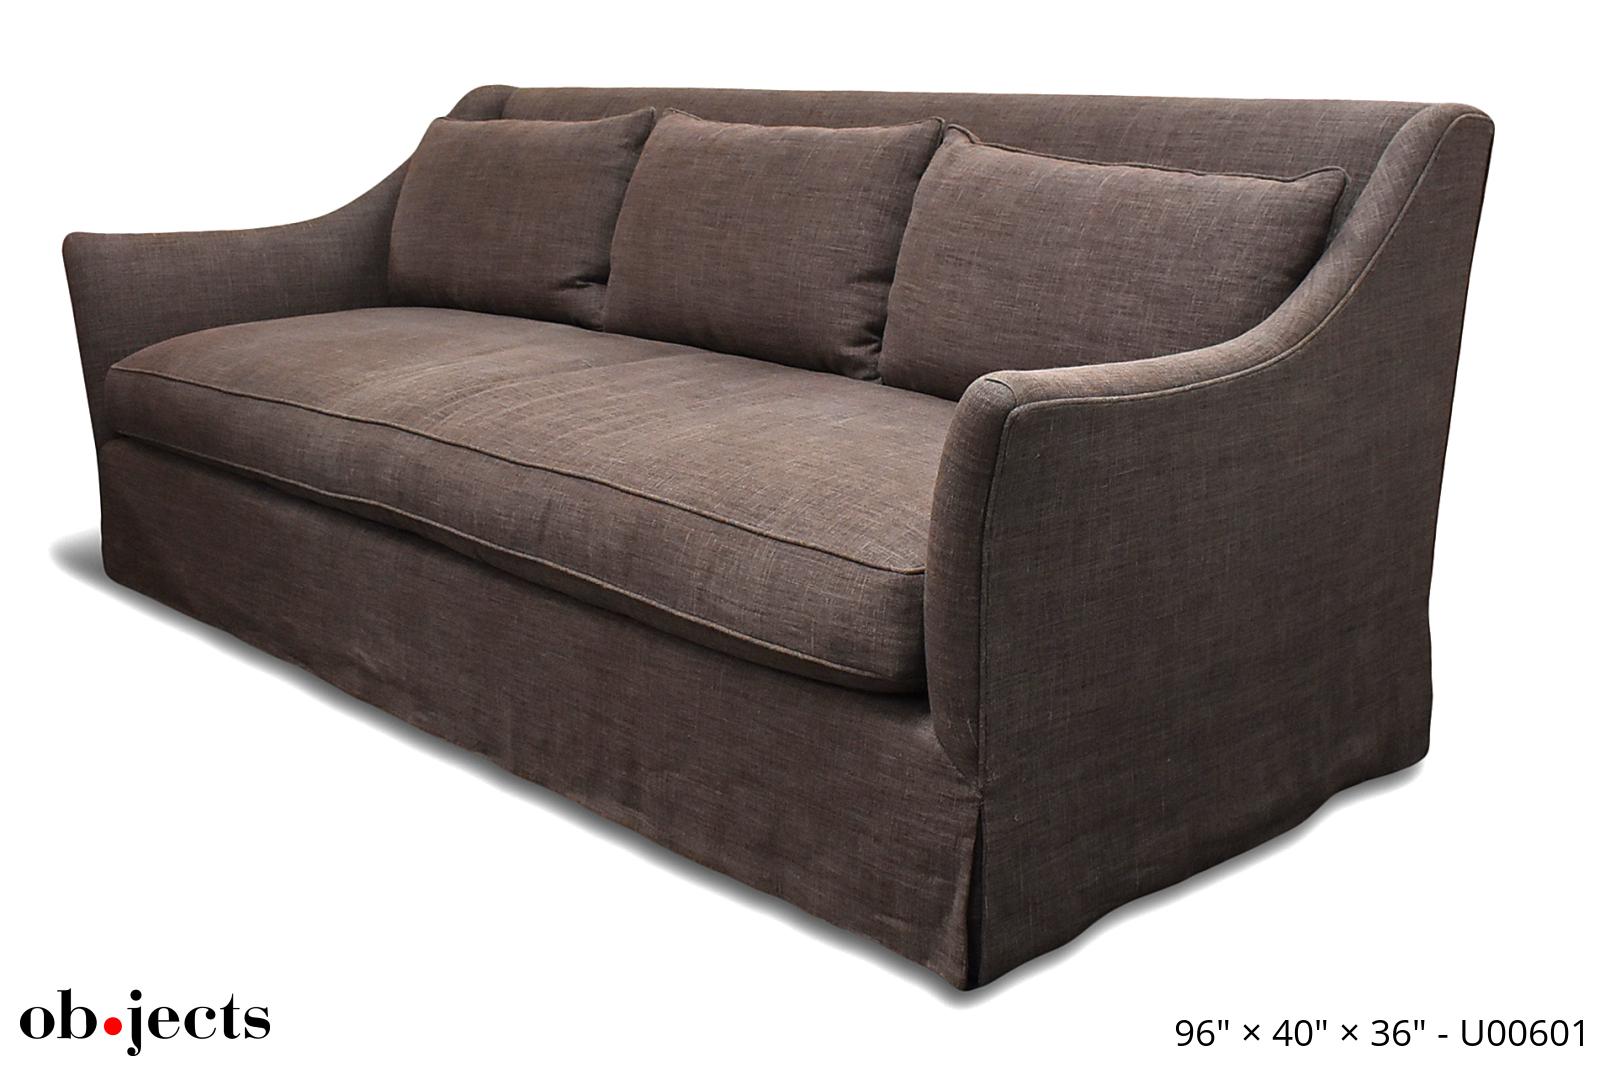 Sofa Aubergine Belgium Linen Sloped Arms | Ob•jects